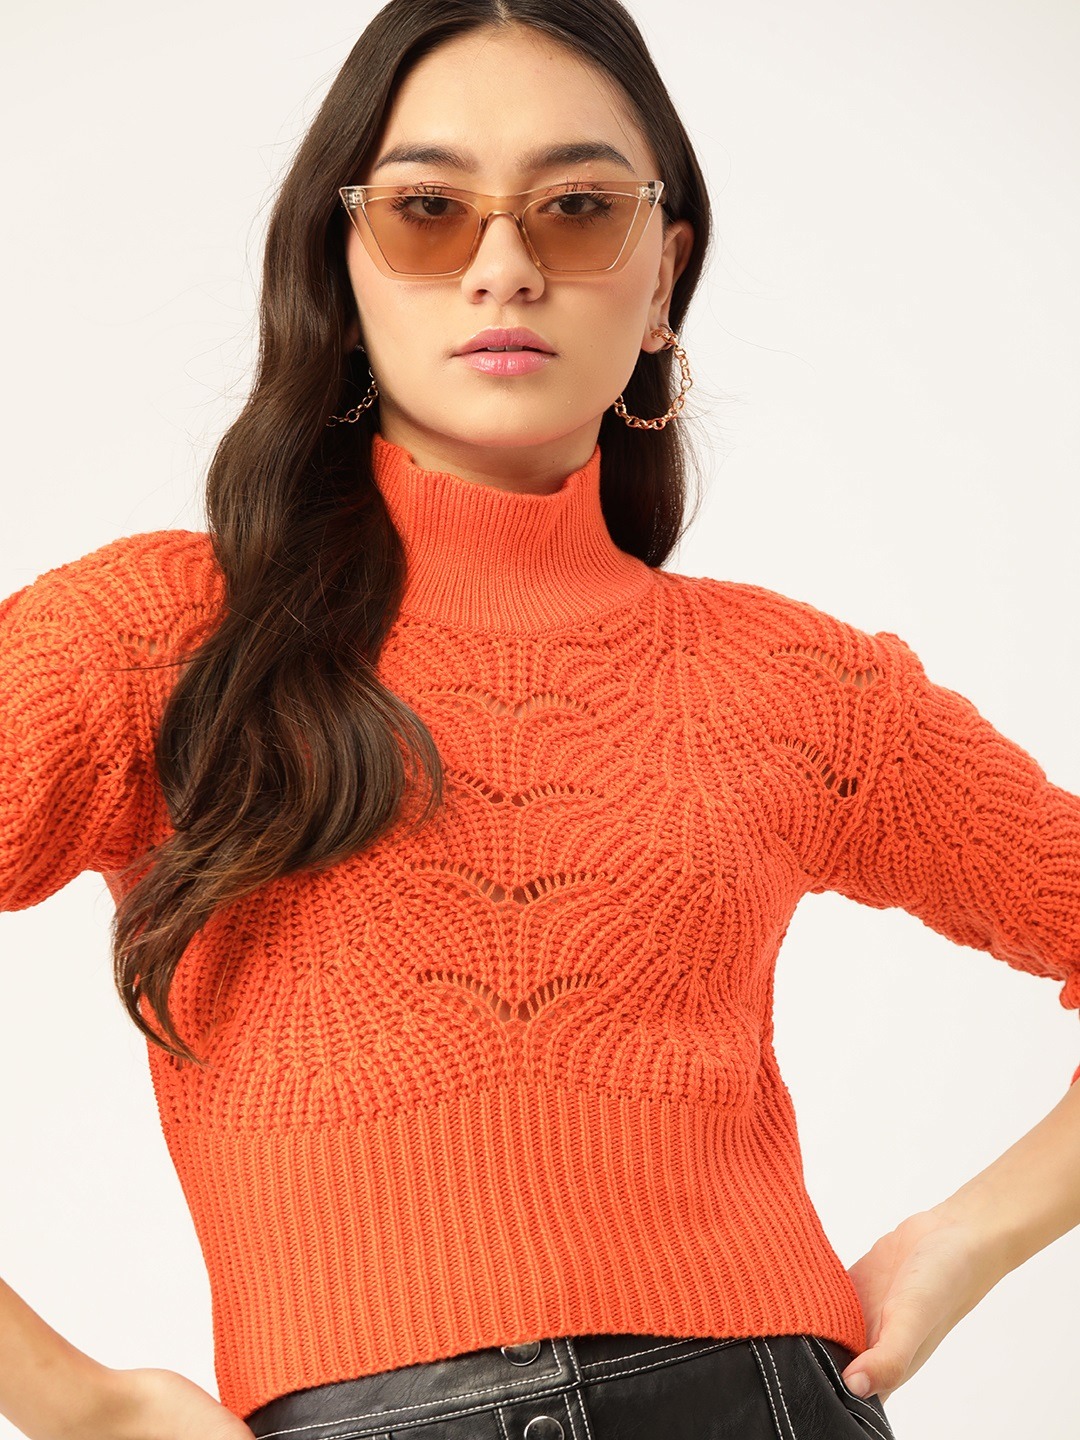 9 Wardrobe Essentials for every Scorpio Woman - Turtle neck outfits